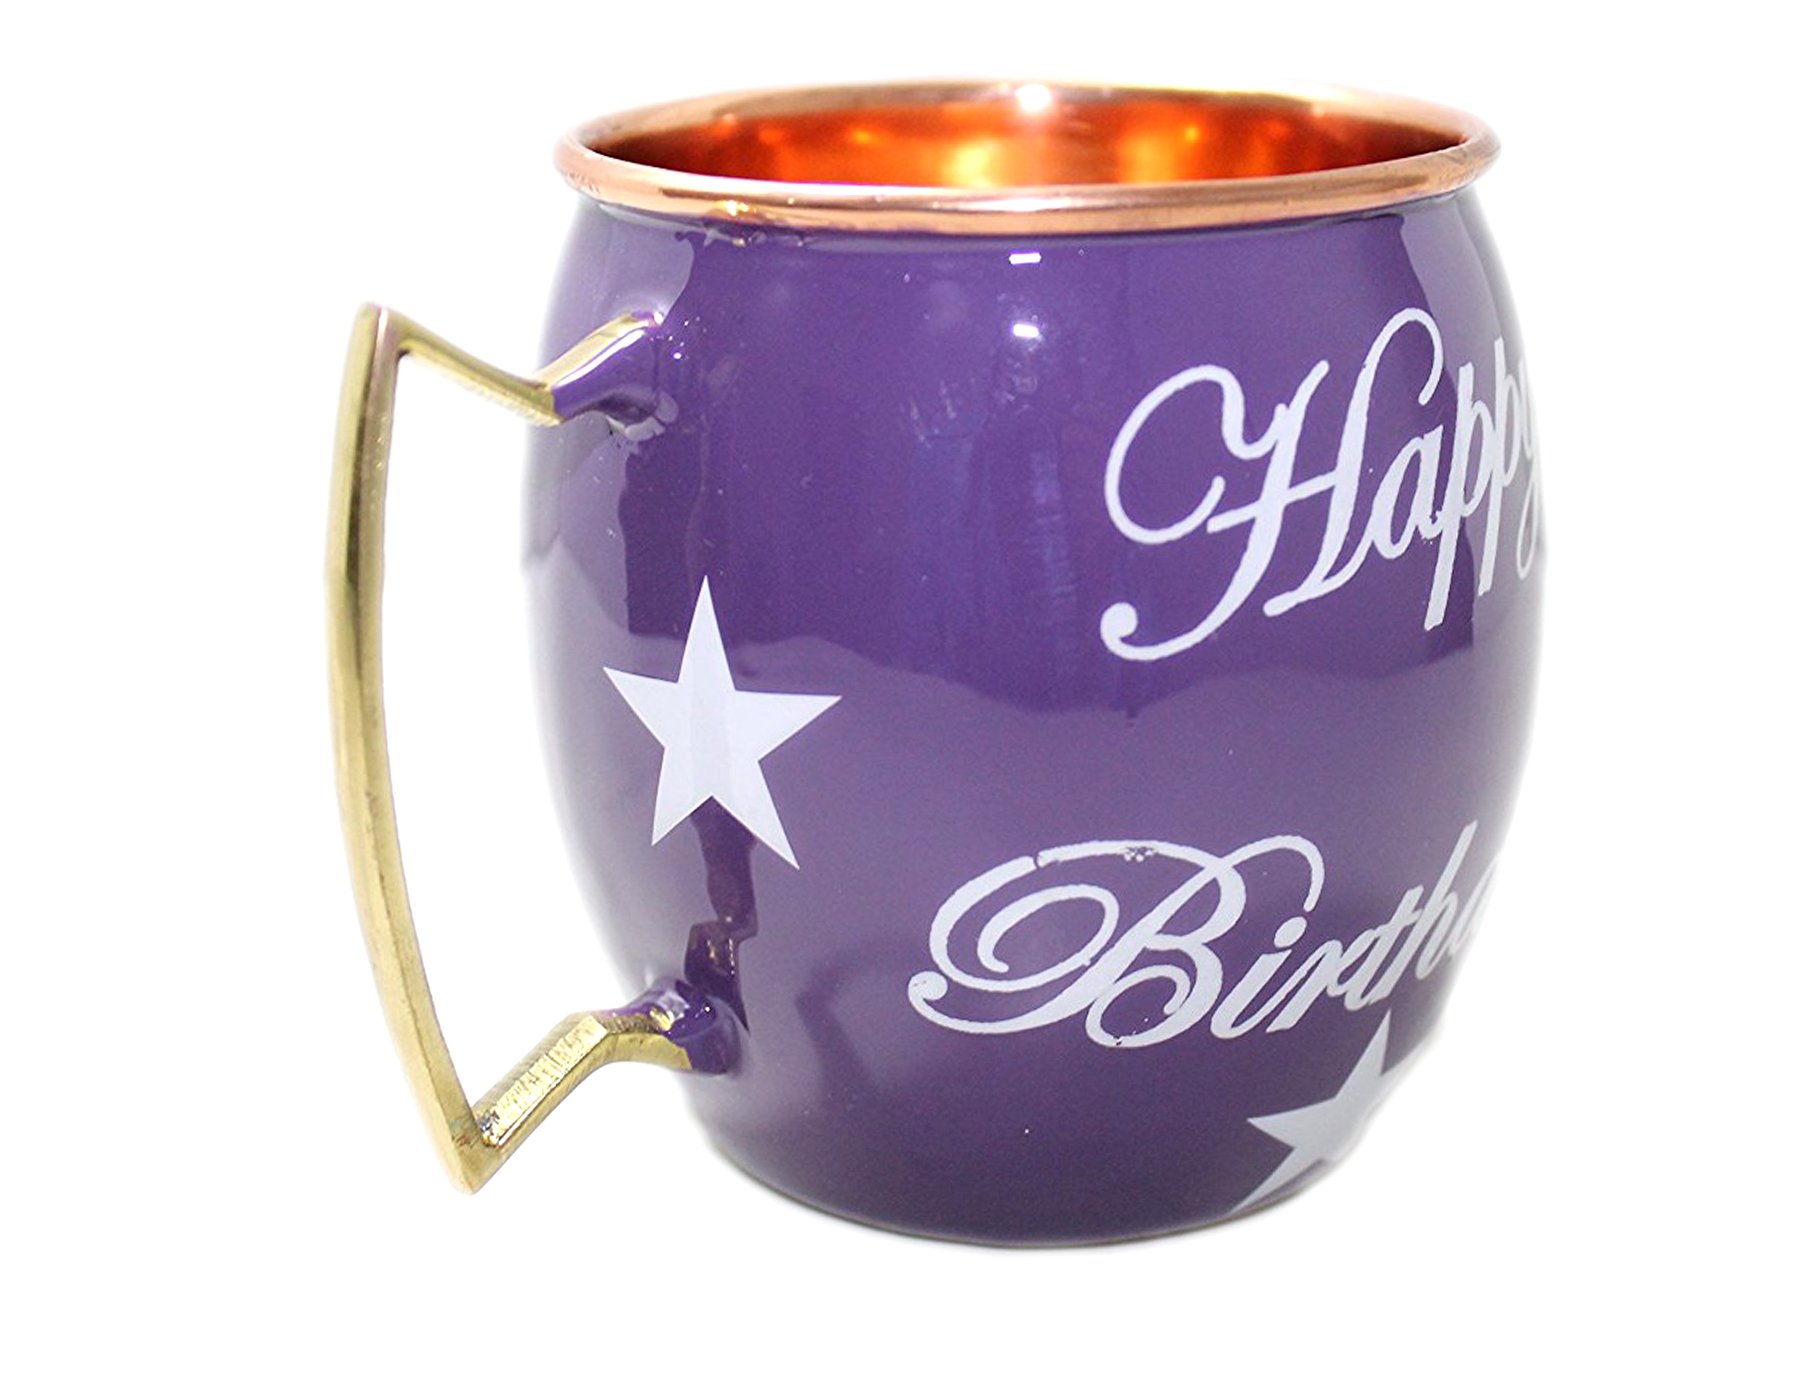 PARIJAT HANDICRAFT Happy Birthday Hand Painted Copper Mugs Special Deign For Gift On Birthday Moscow Mule Mugs Cups Mugs Smooth Finish.